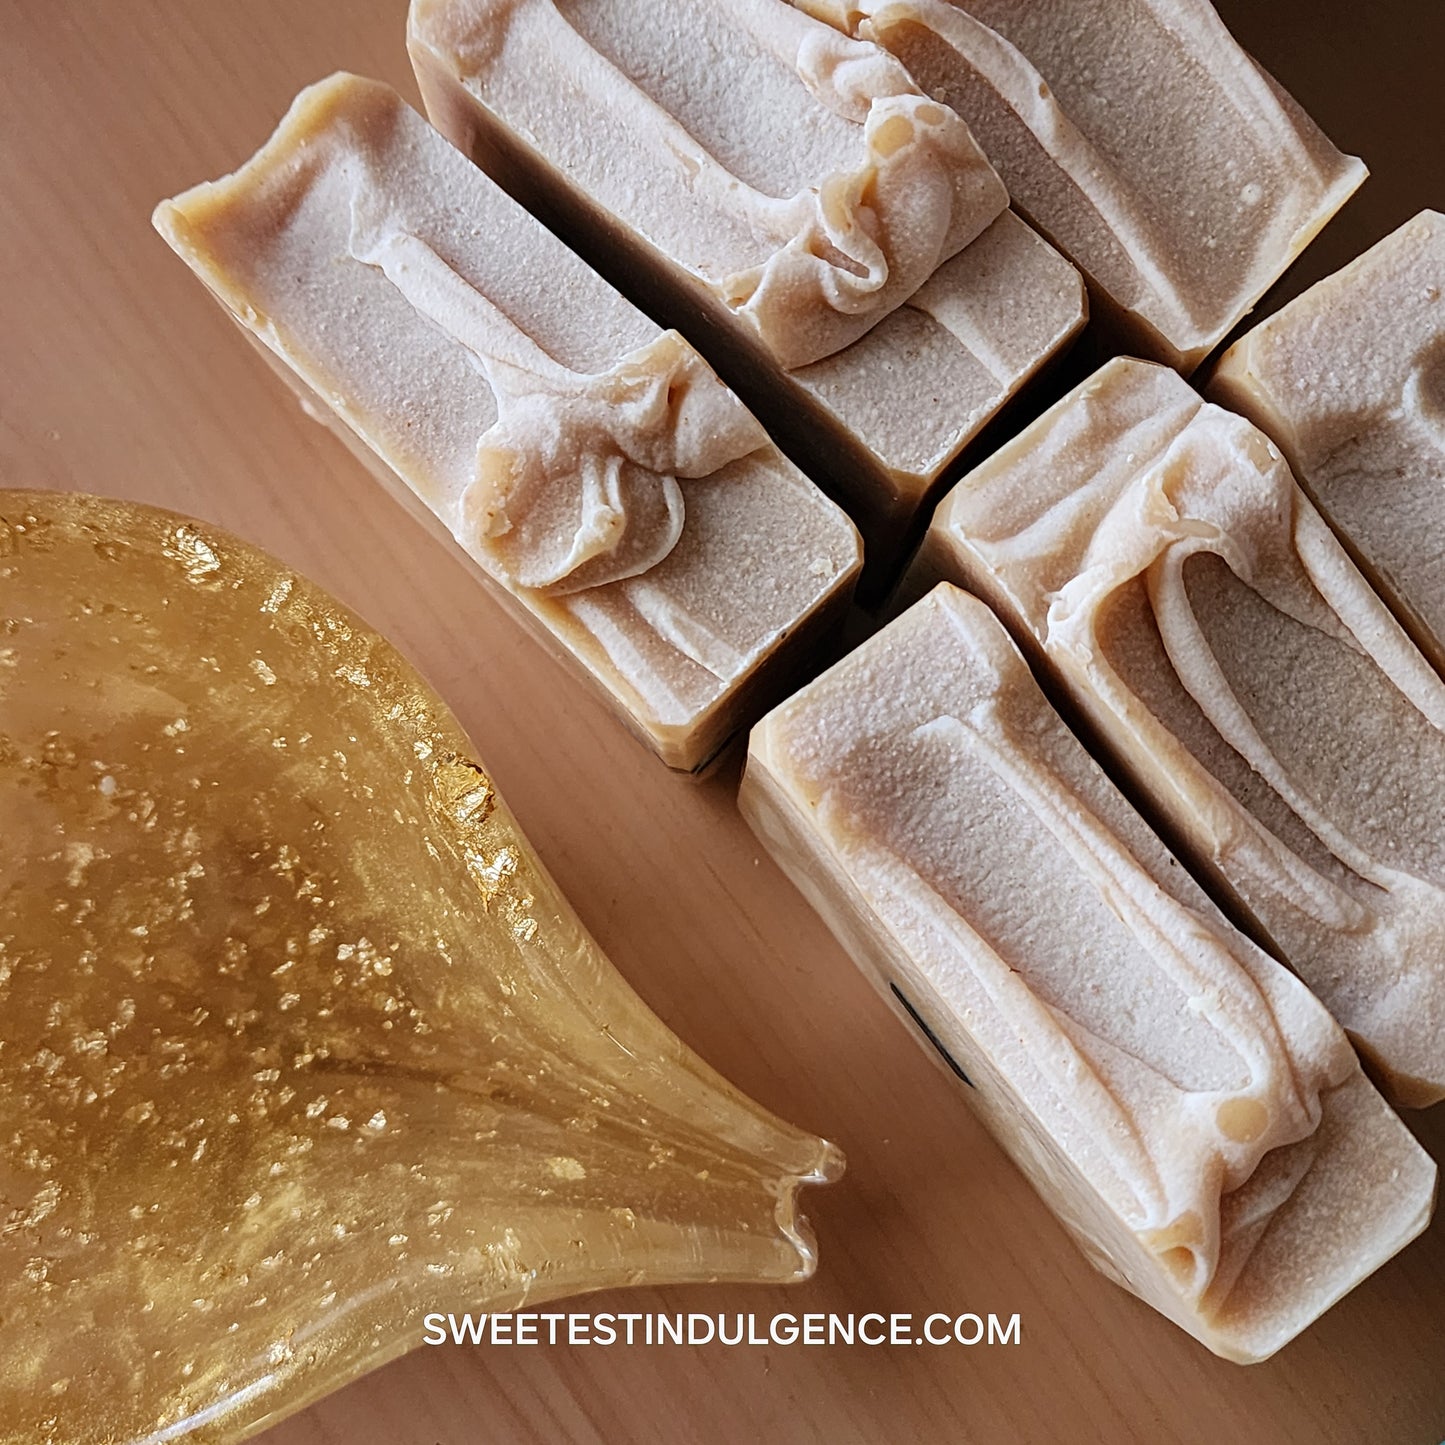 Mellow Out | Exfoliating Castile Soap - Sweetest Indulgence 